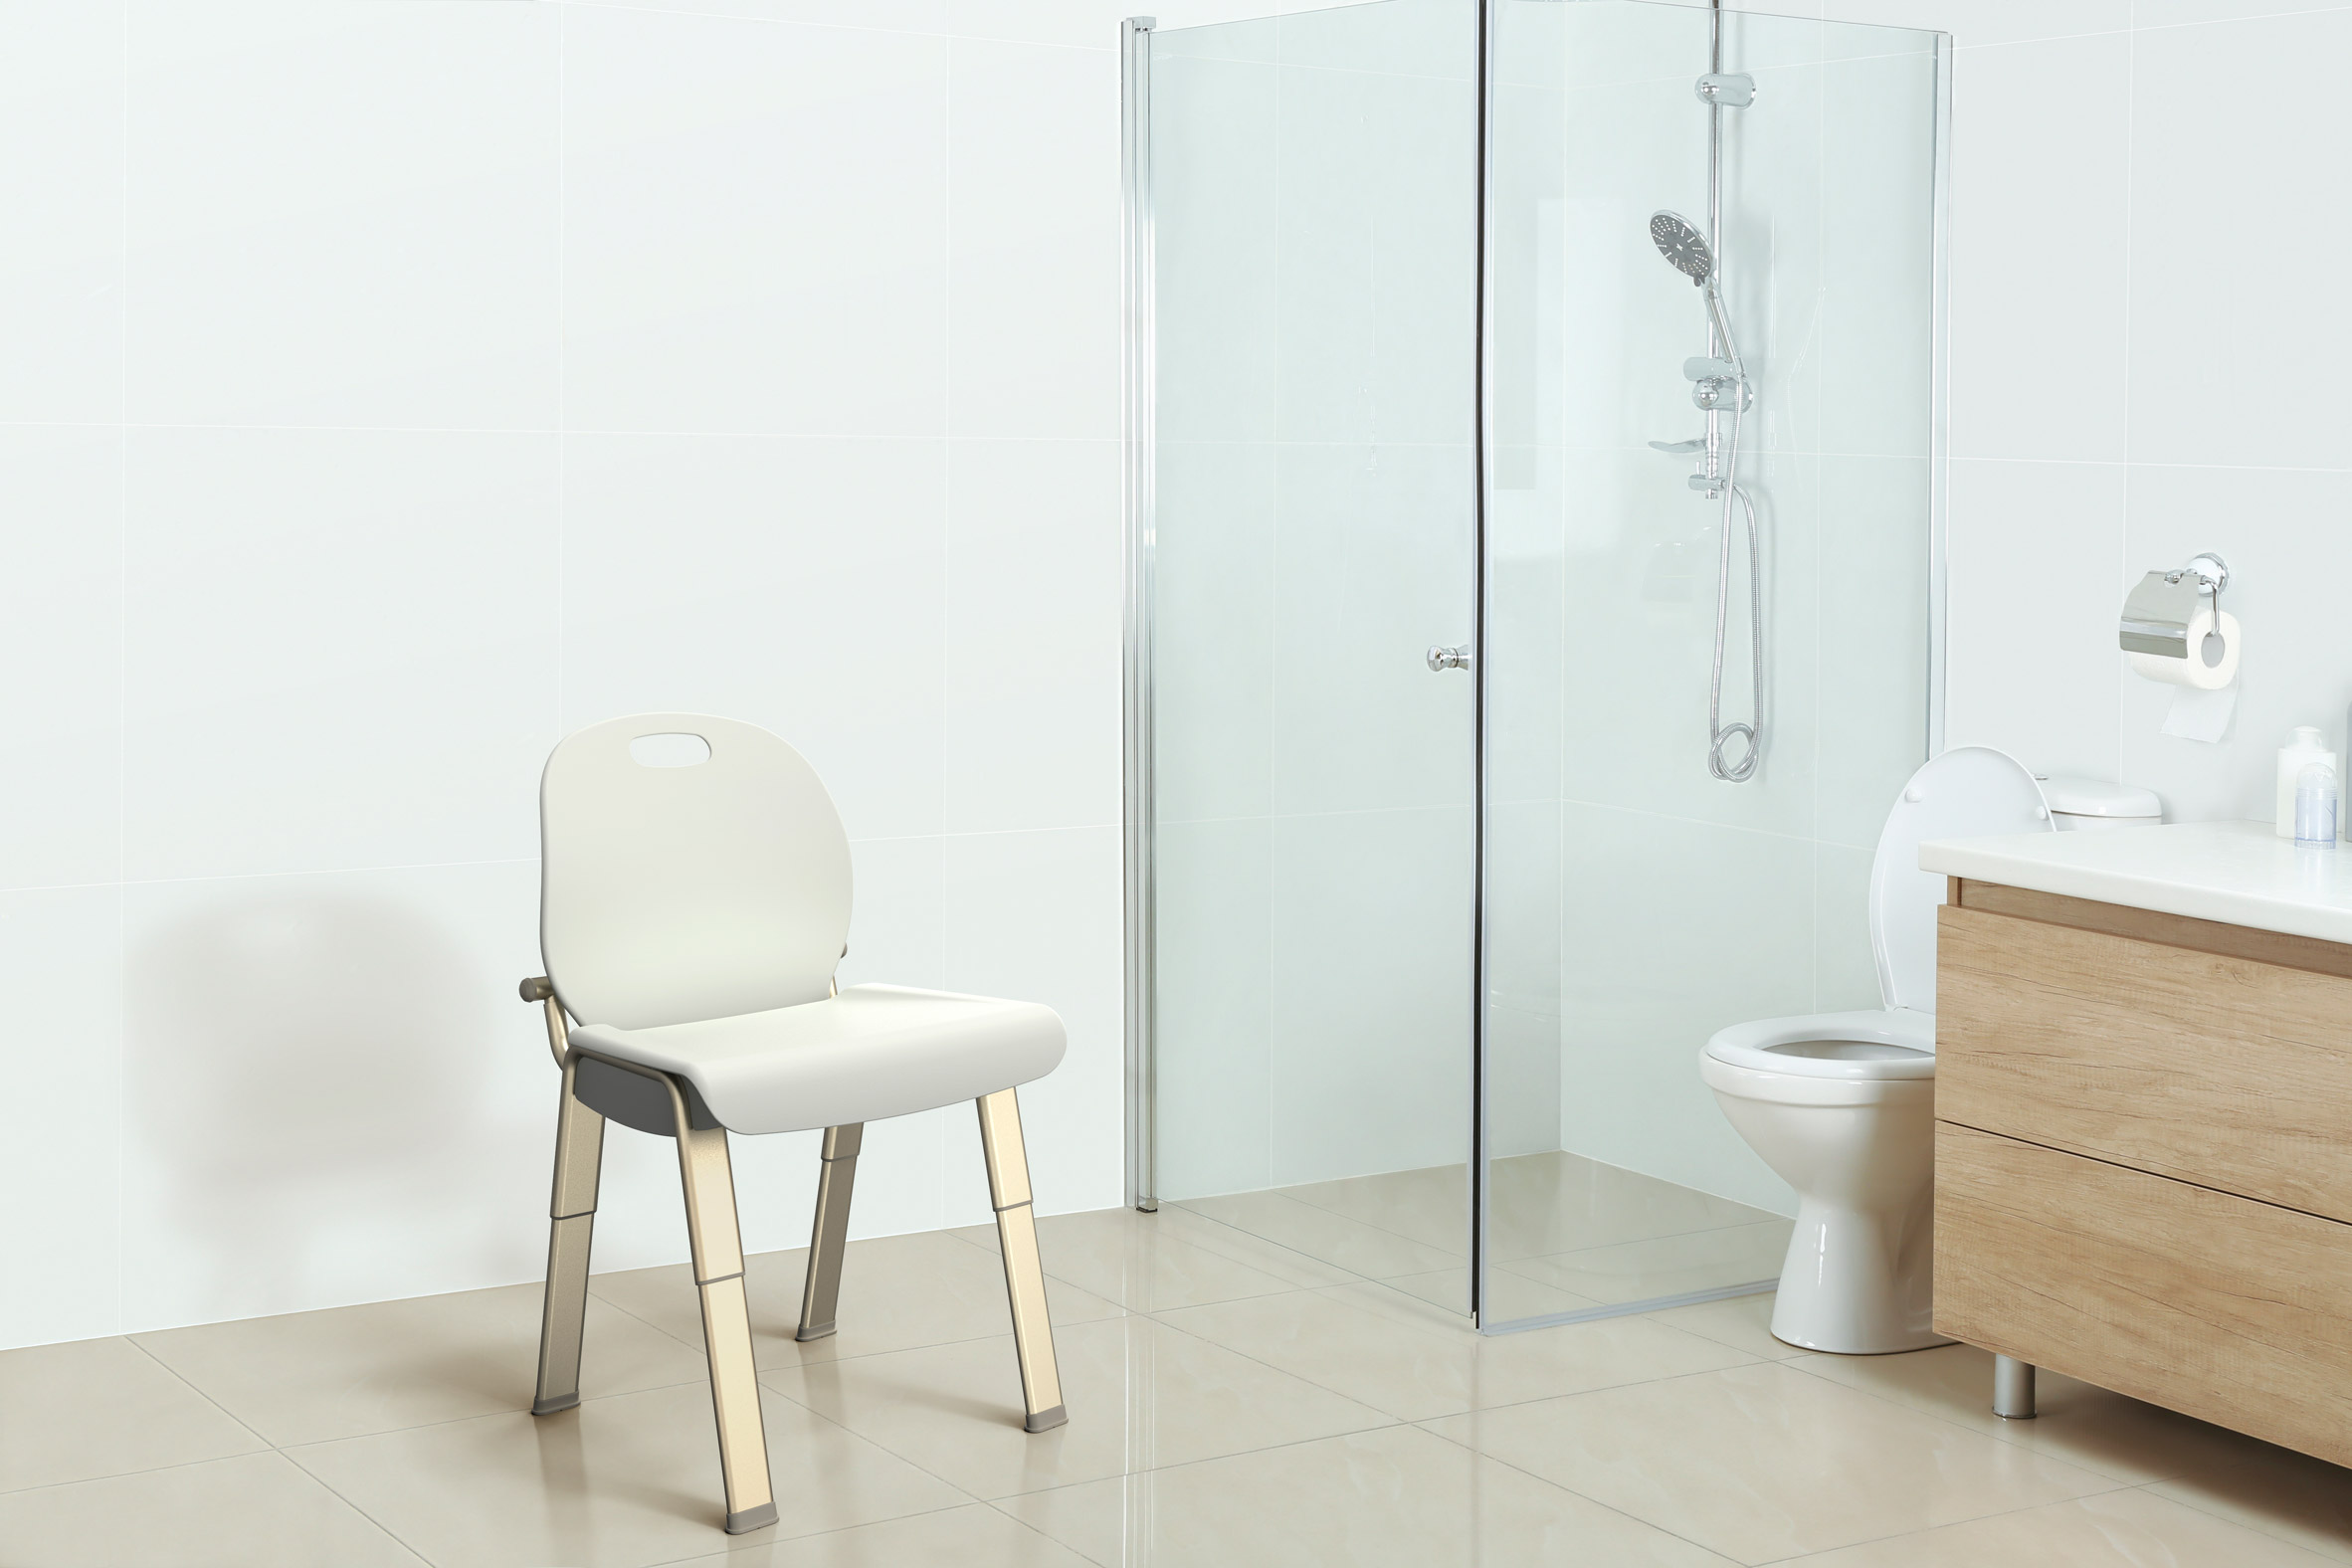 An accessible chair next to a shower